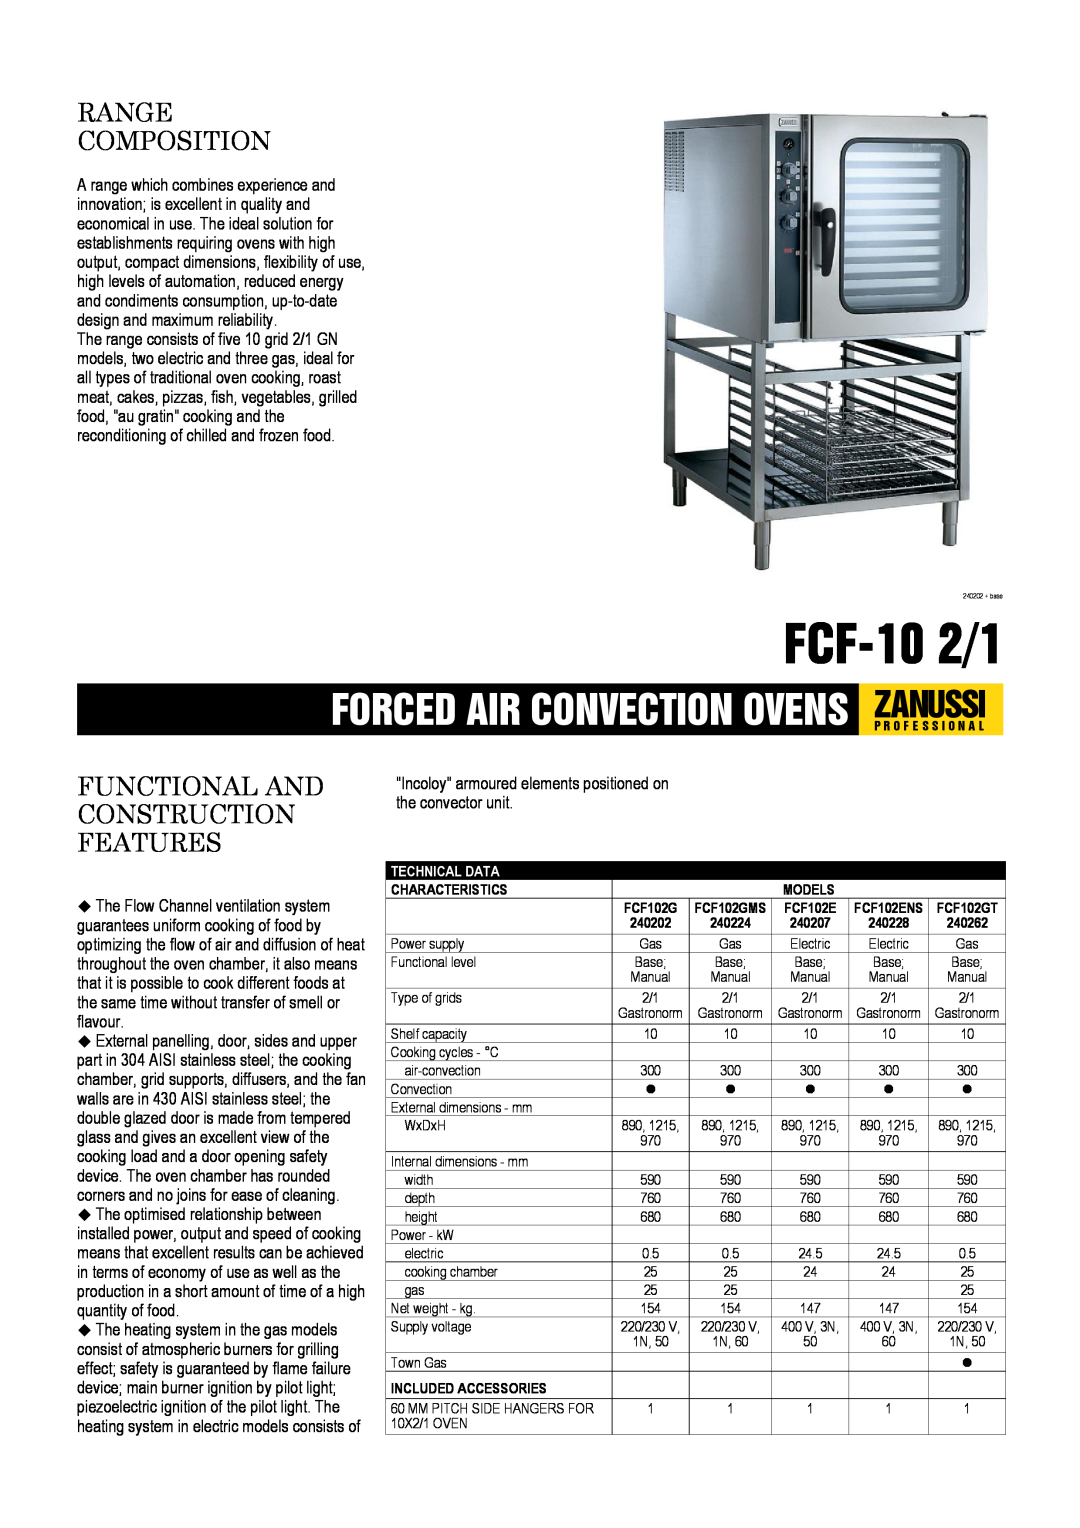 Zanussi FCF-10 2/1, 240228, 240202, 240207 dimensions FCF-102/1, Range Composition, Functional And Construction Features 